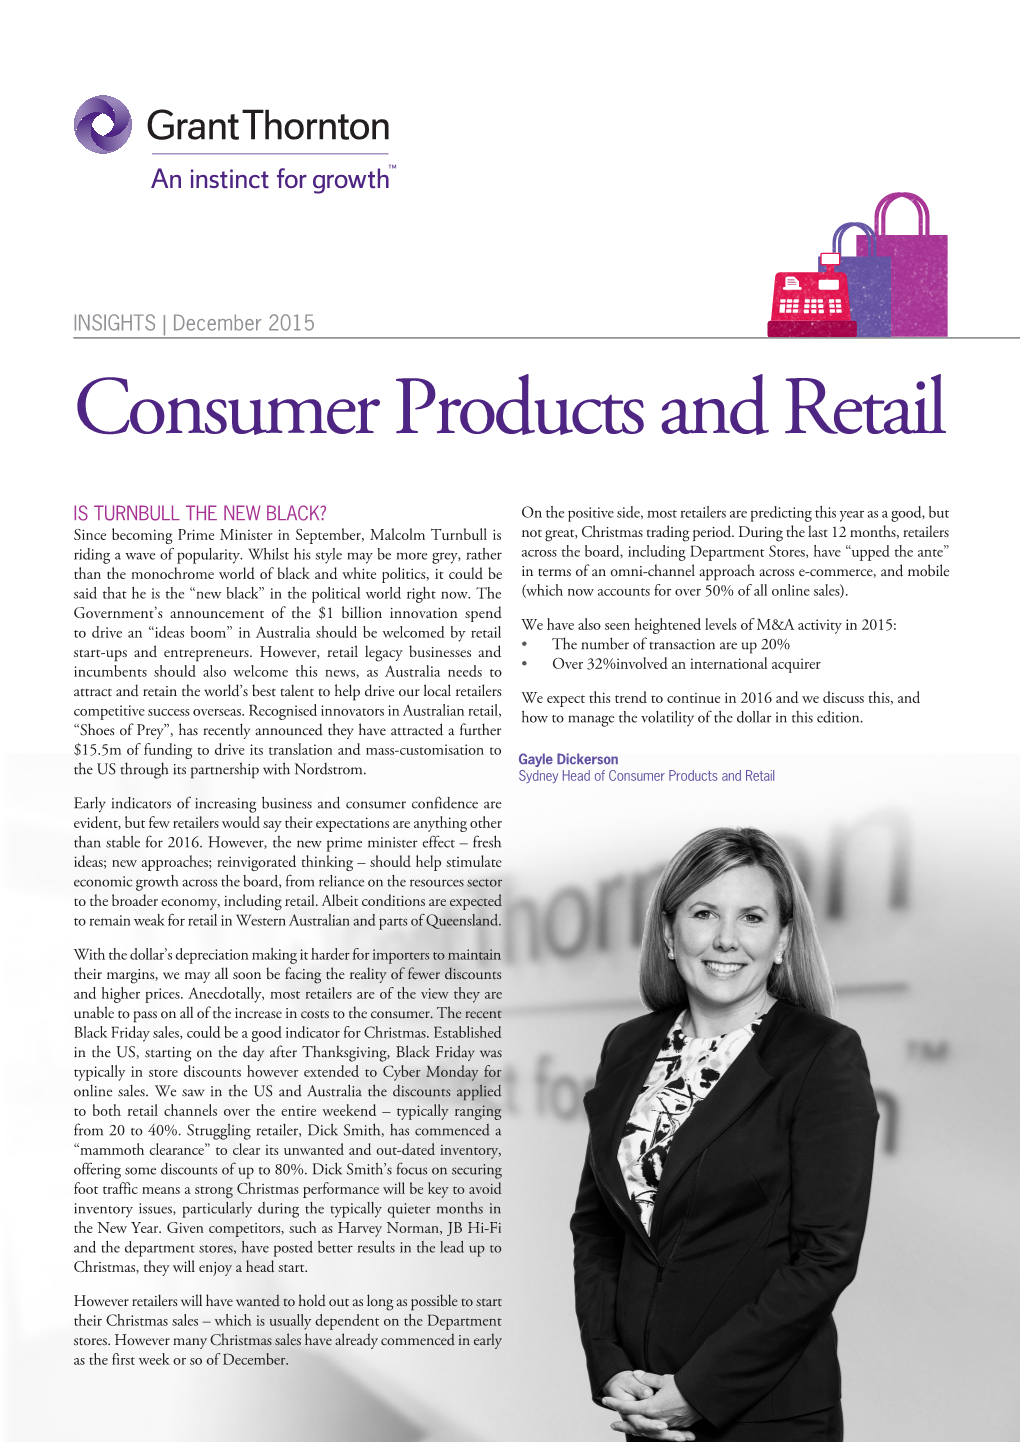 Consumer Products and Retail